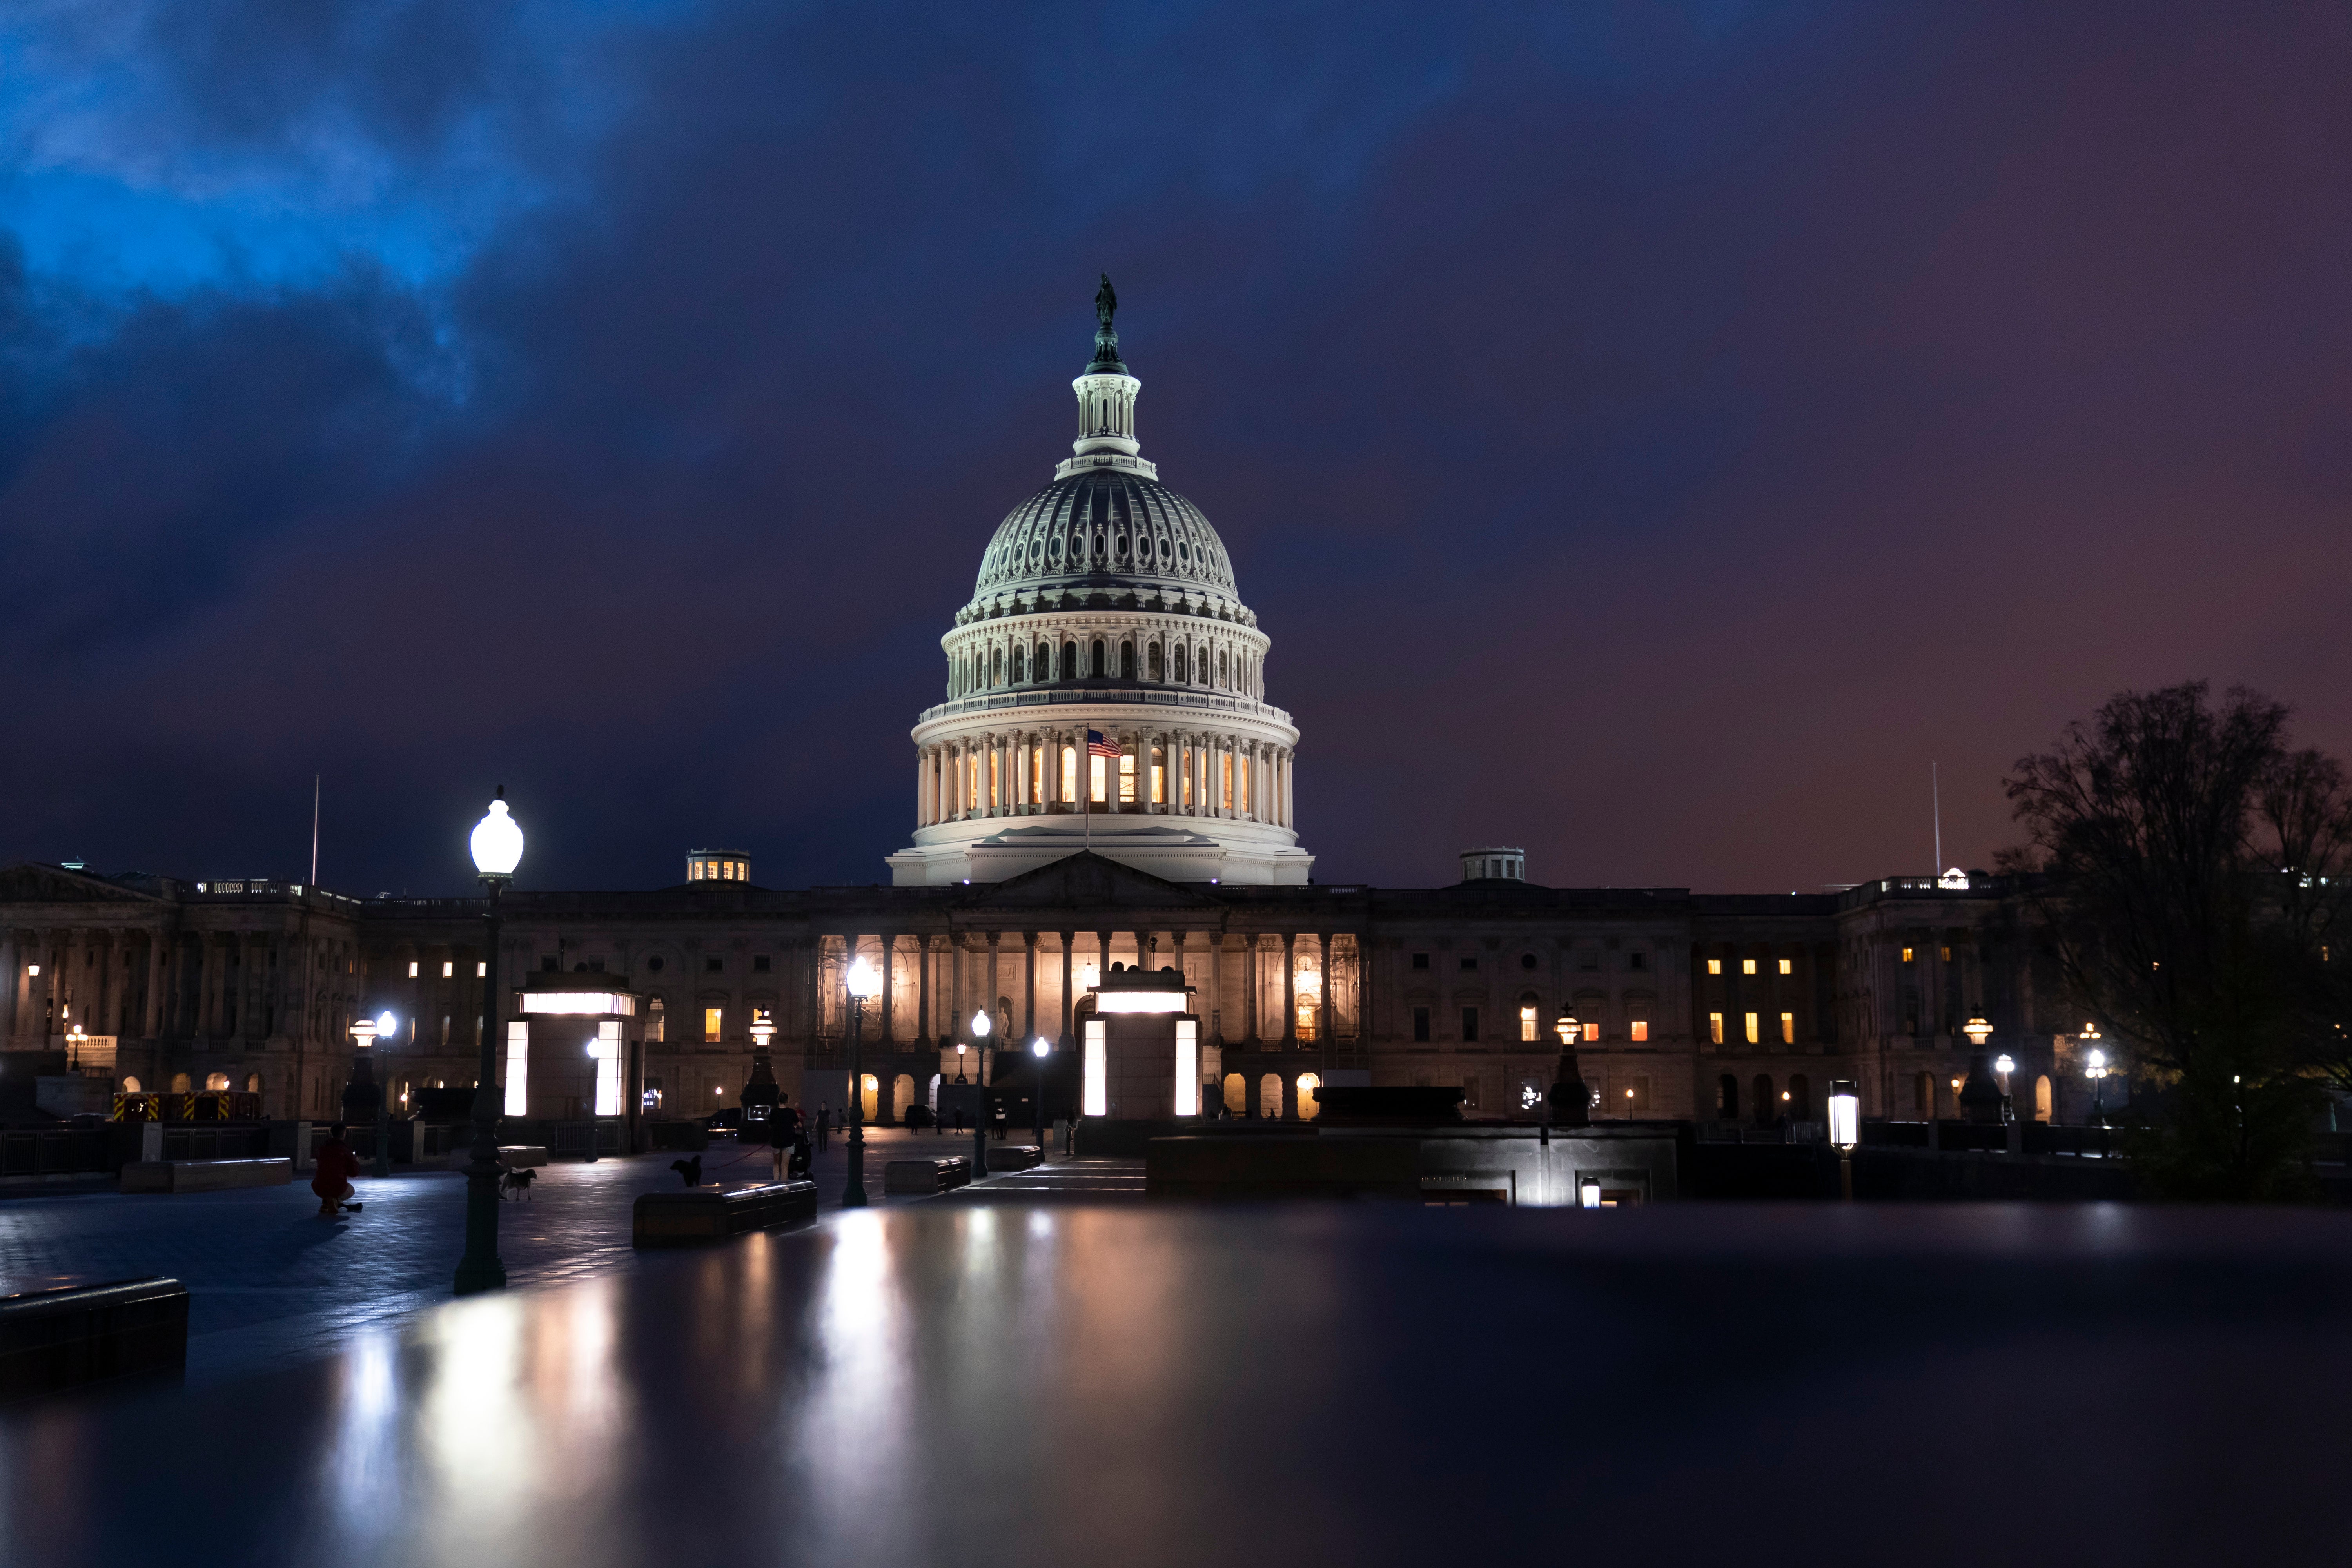 House of cards: fragile alliances mean unrest could happen inside the US Capitol chambers